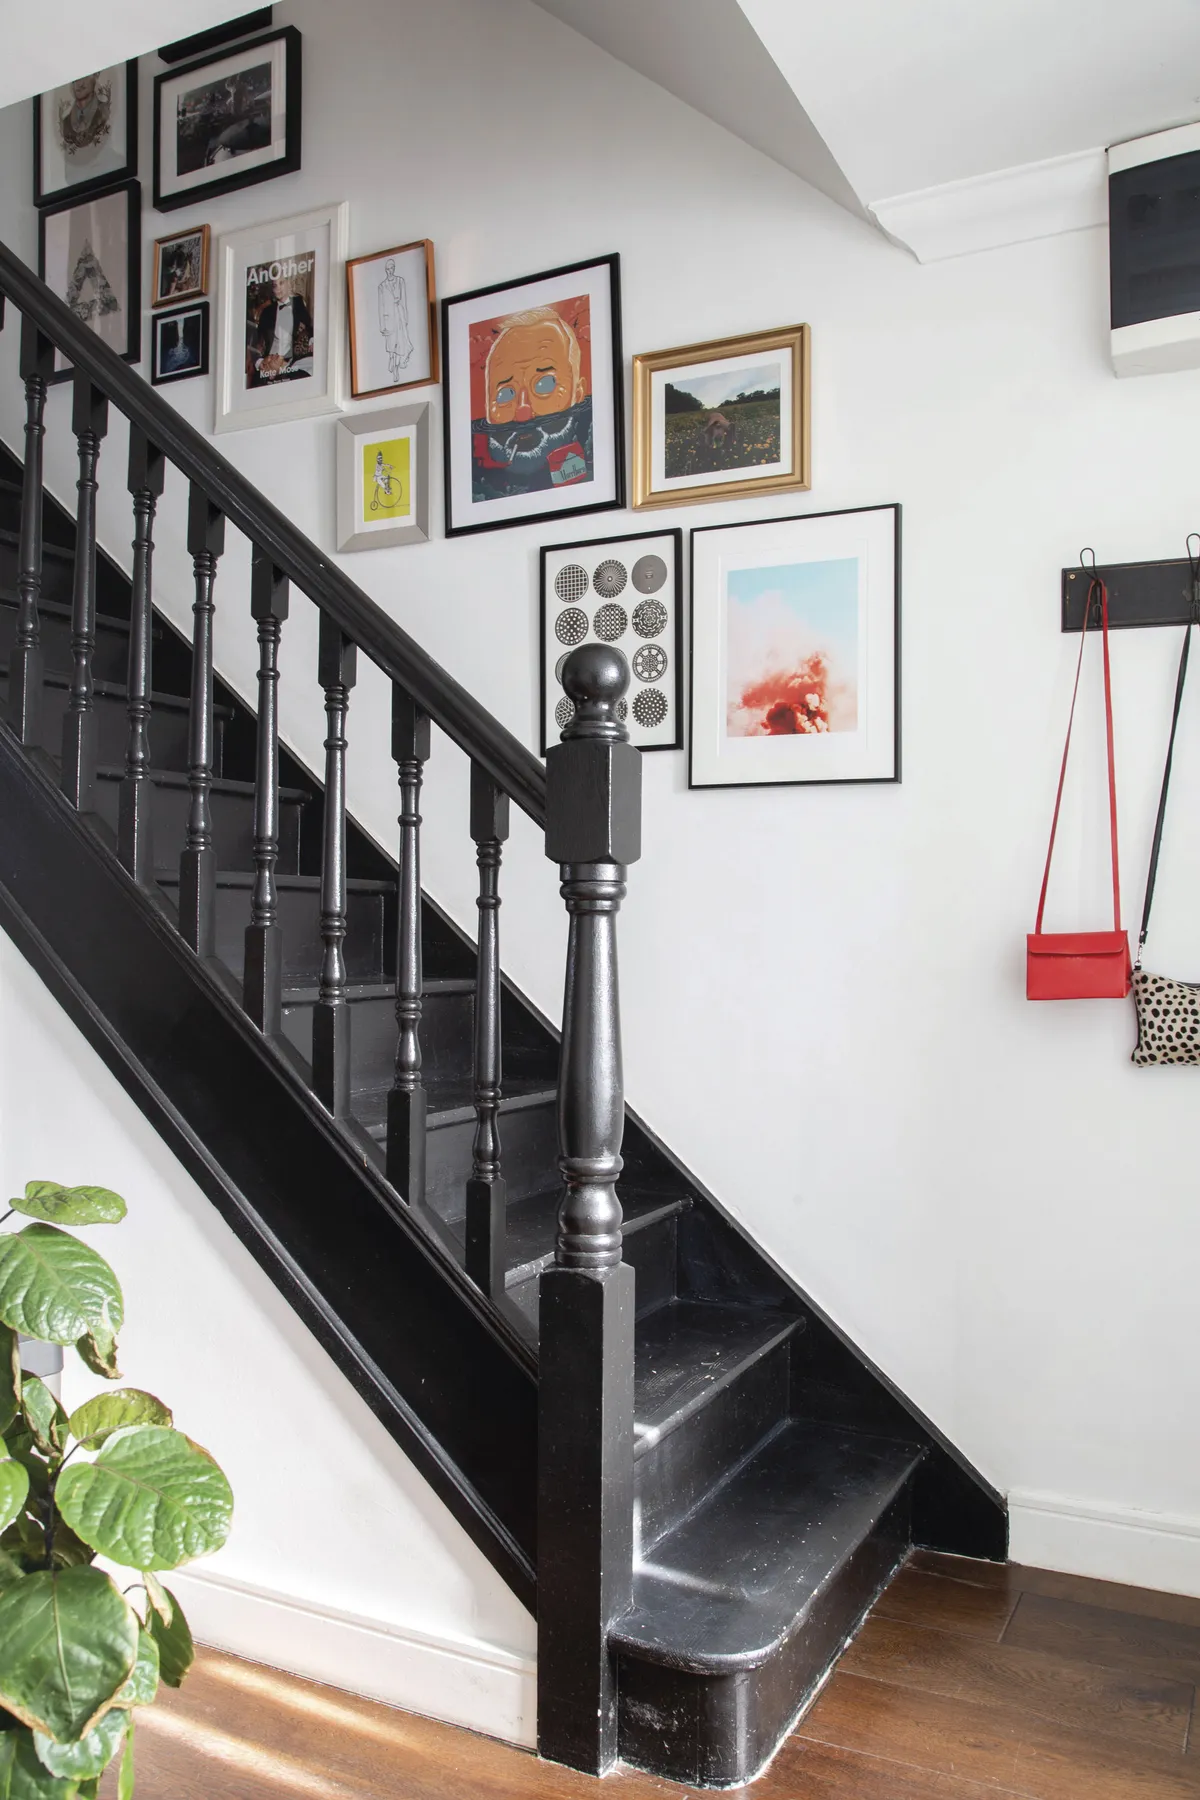 ‘A few years ago, I ripped up the carpet on the stairs and landing, painted the staircase and laid a monochrome, patterned vinyl on the landing,’ Elaine shares. ‘I love the end result and, as we have a large dog, it’s much more practical than carpet.’